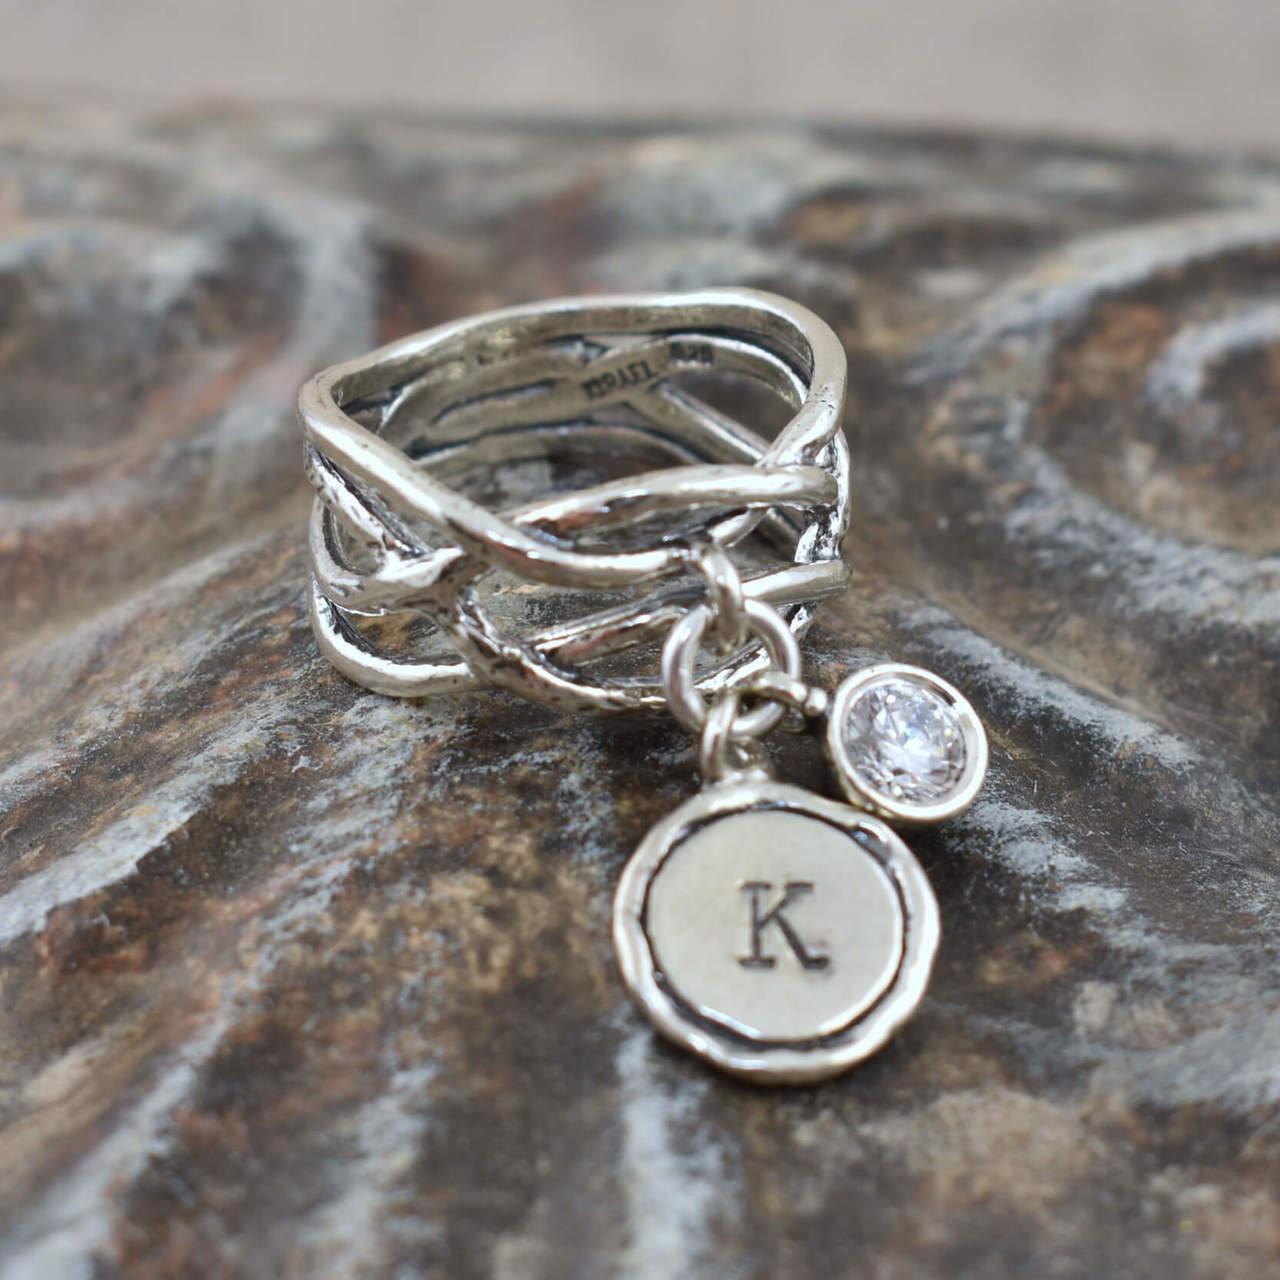 Hand stamped sterling silver ring